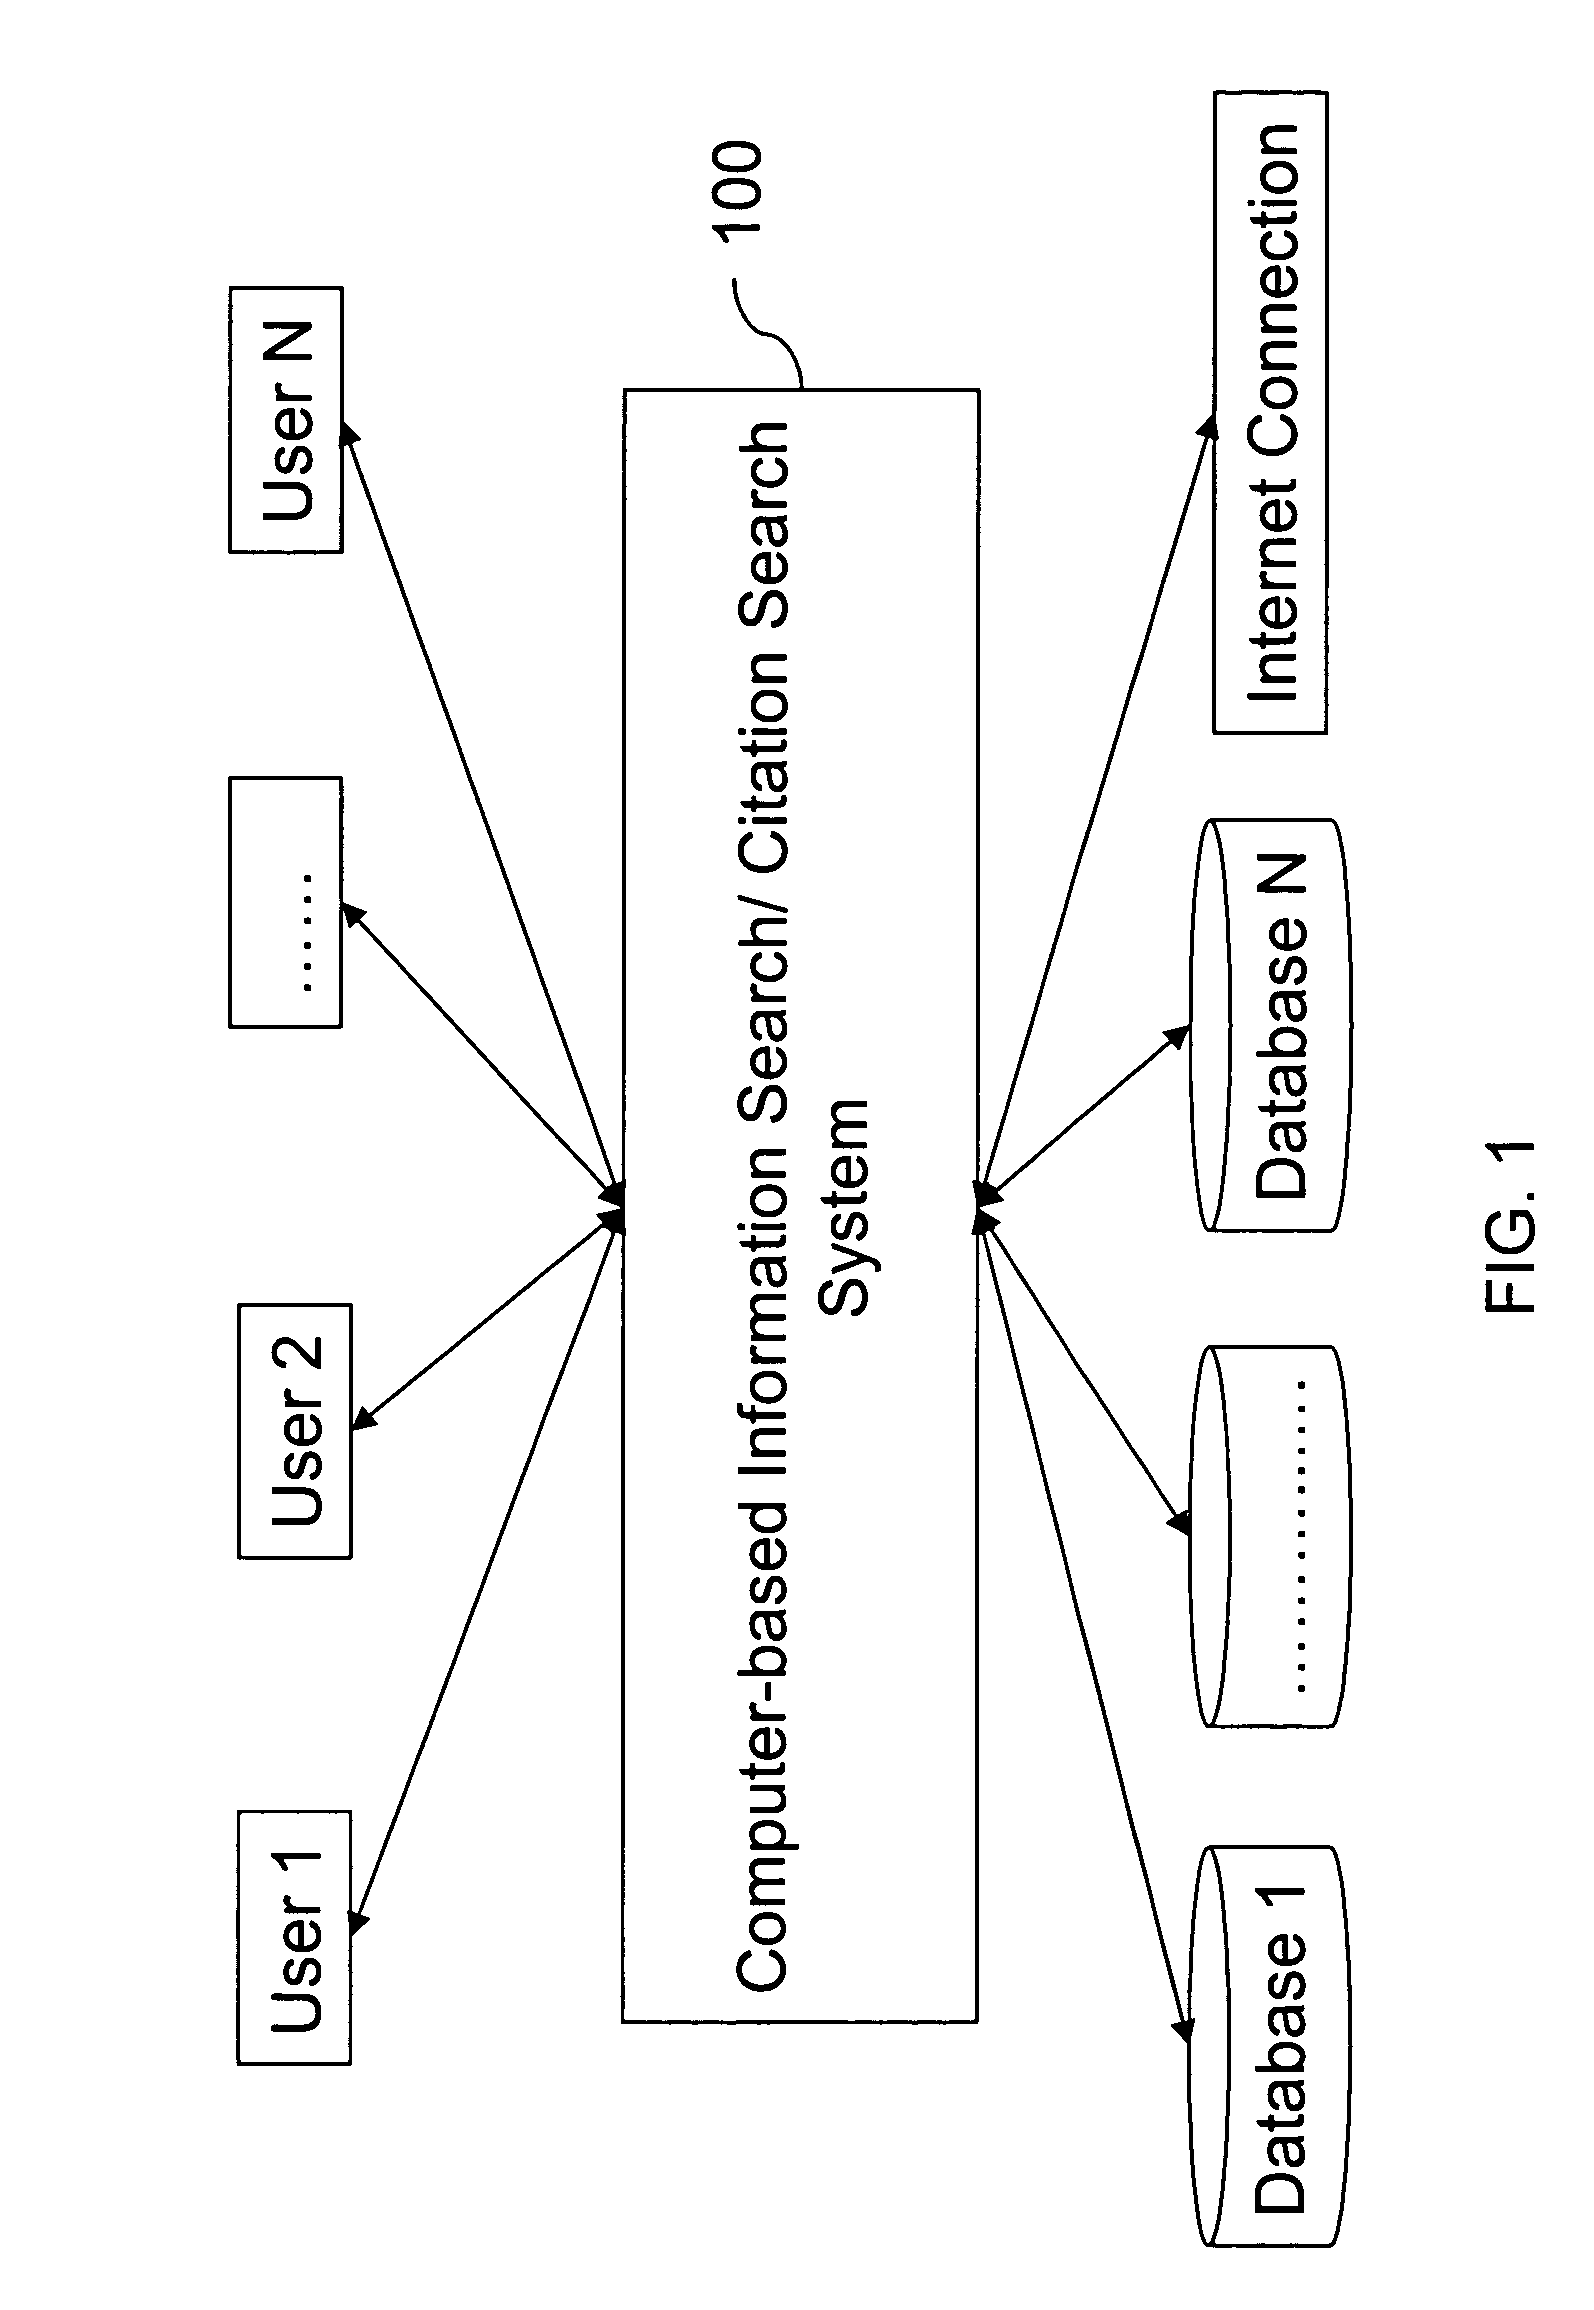 Methods for information search and citation search